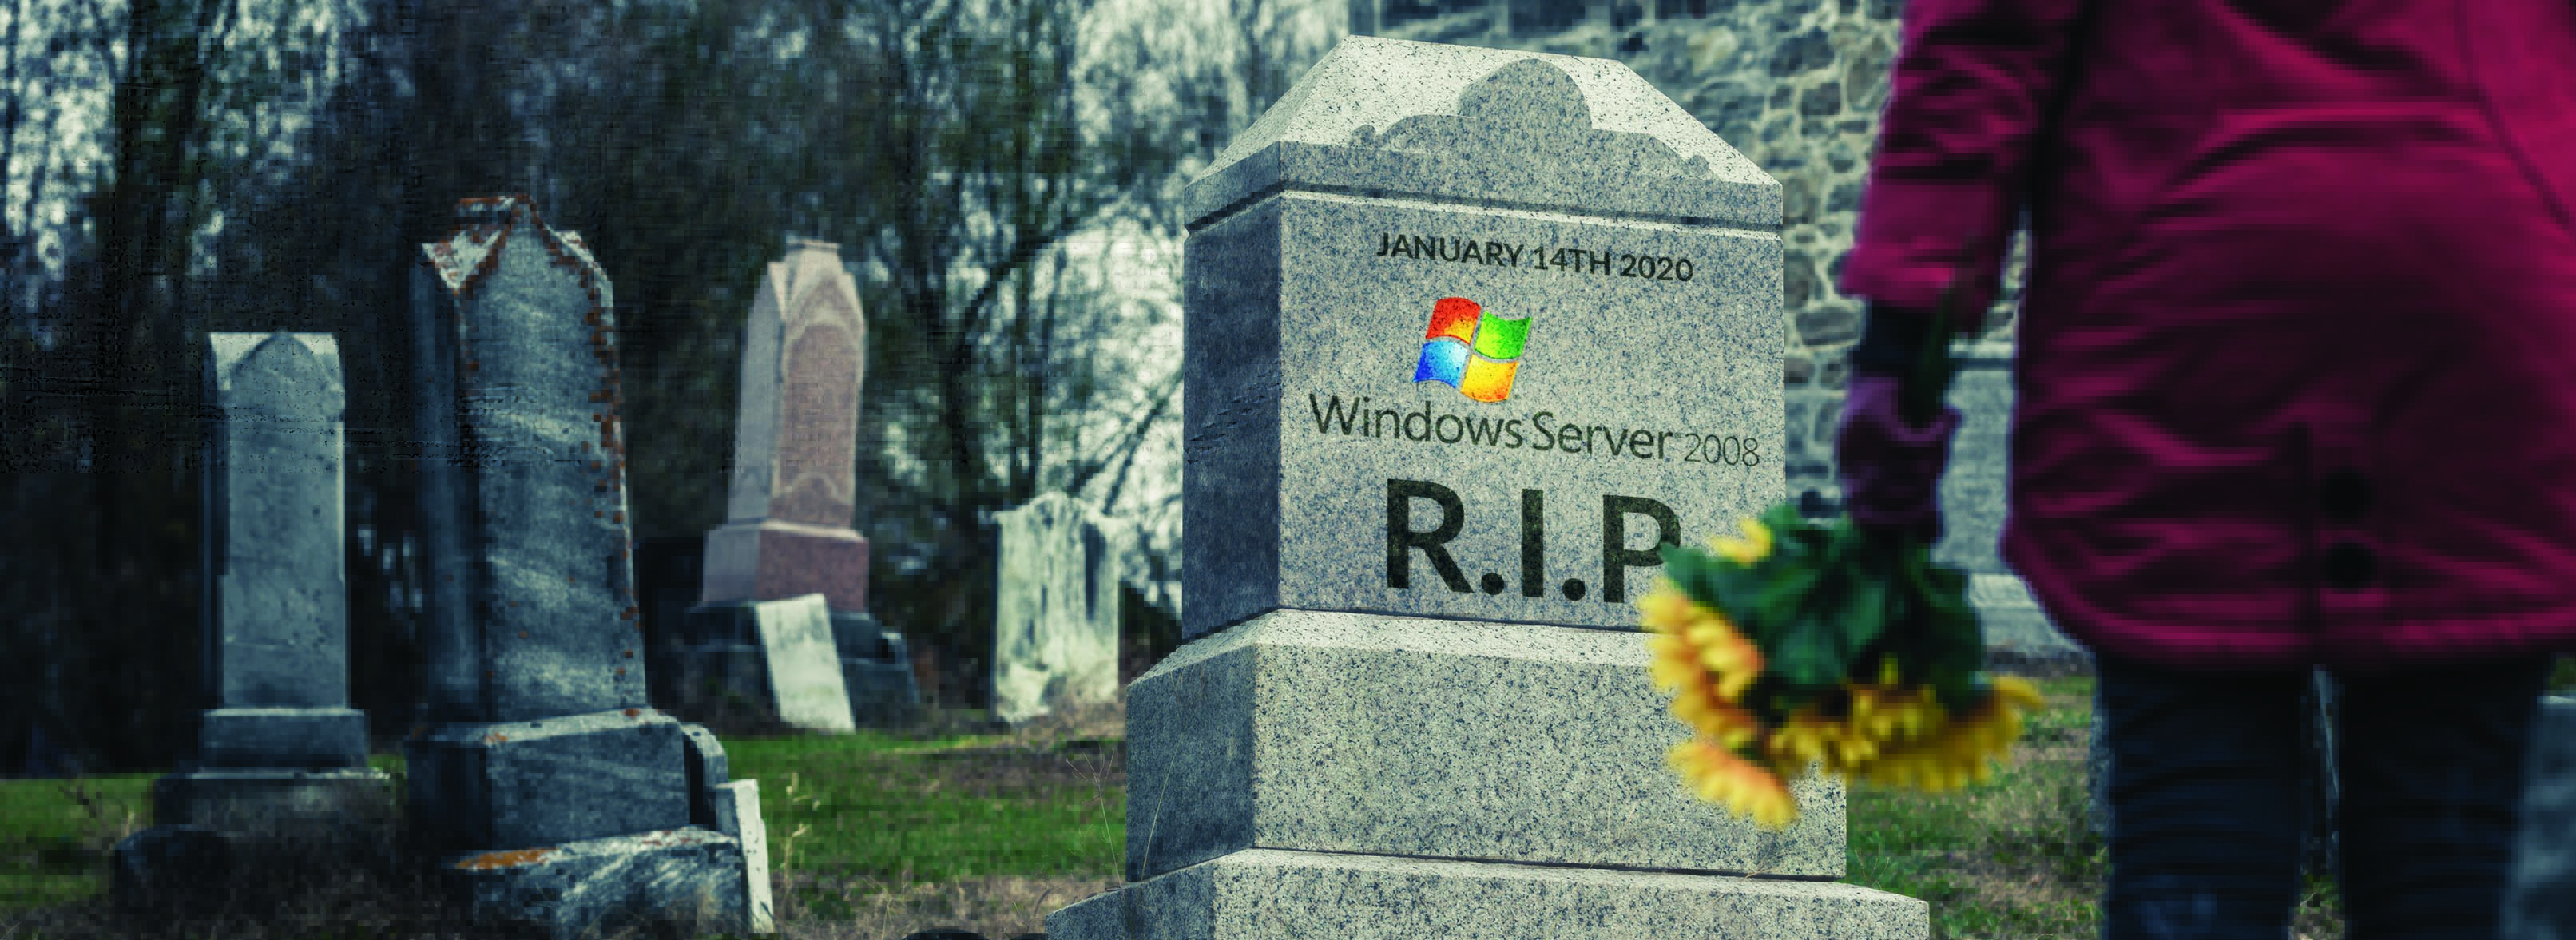 Windows 2008 End of Life Approaching